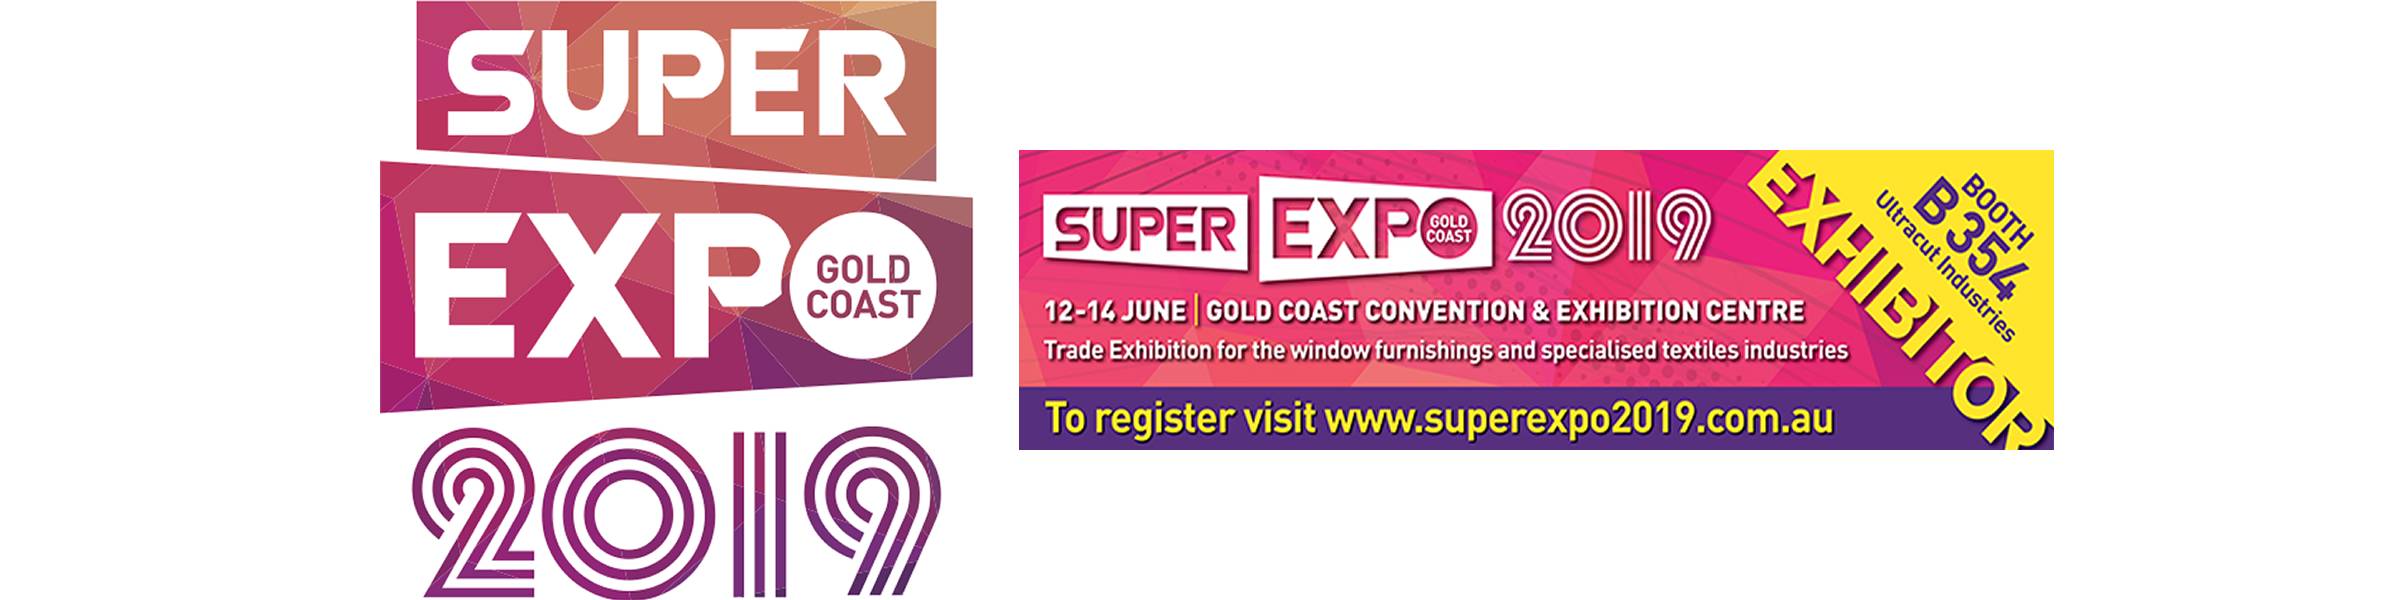 Super Expo 2019 - Booth 354